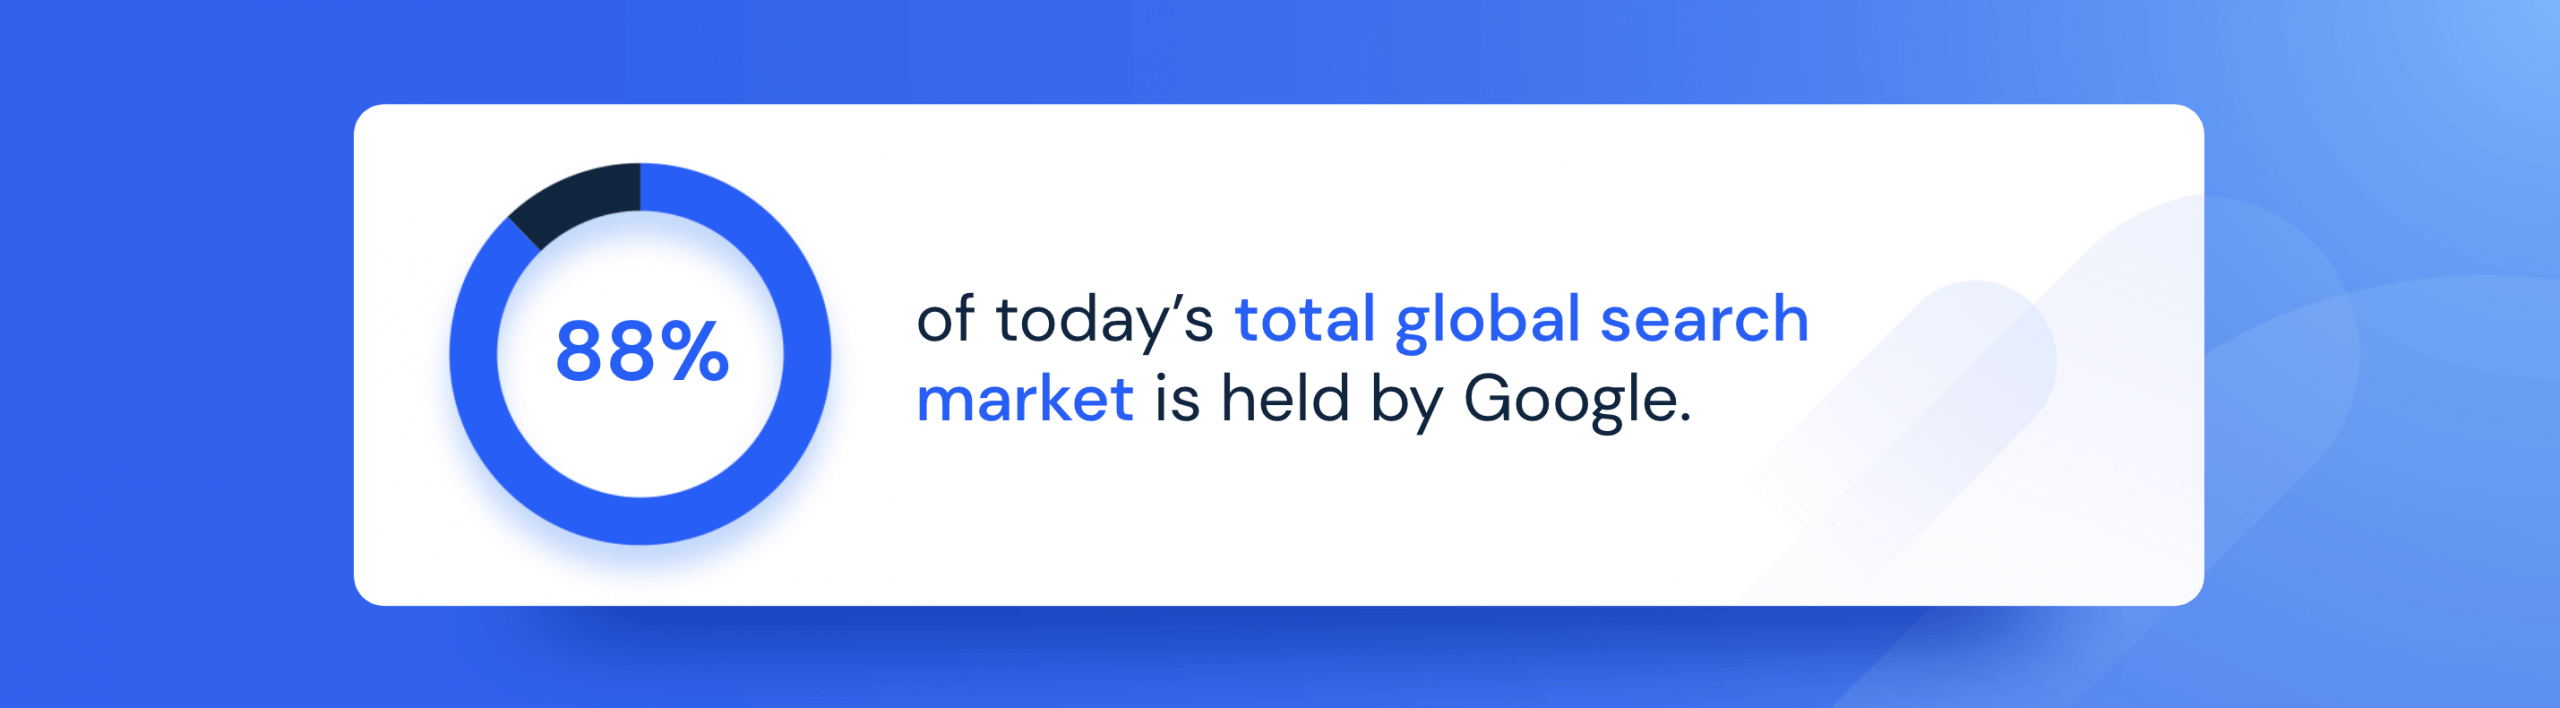 statistic showing 88% of today’s total global search market is held by Google representing SEO vs. PPC